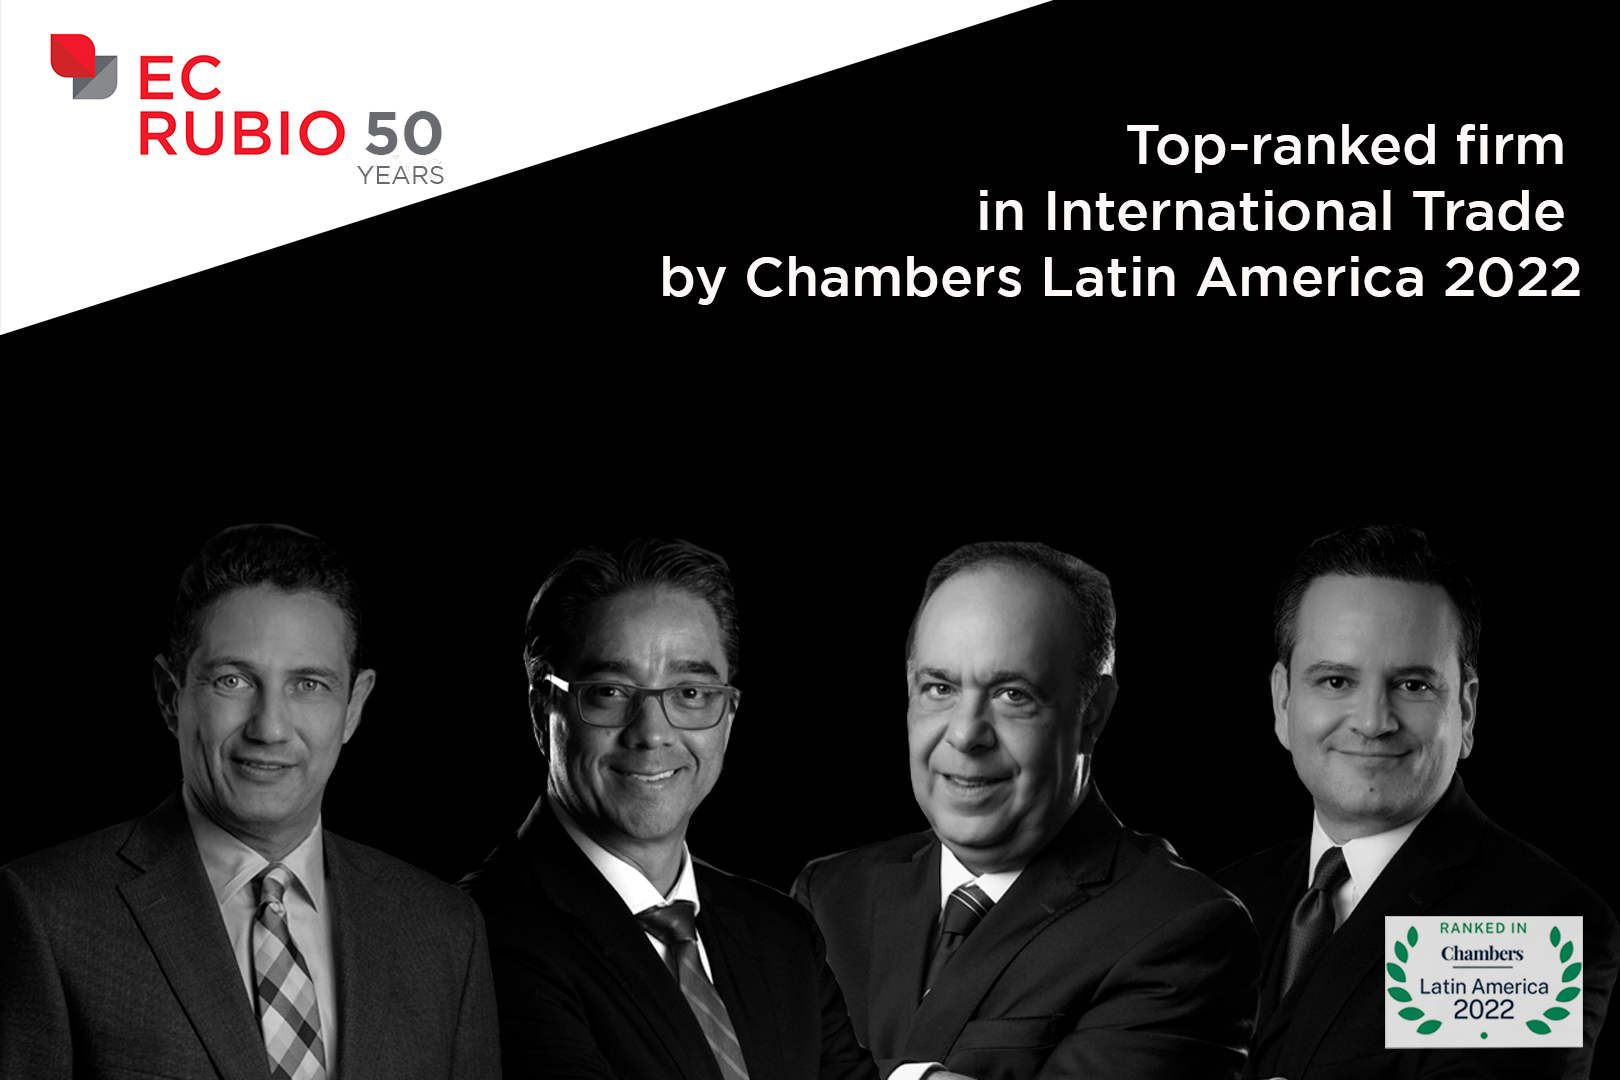 Topranked firm in International Trade by Chambers Latin America 2022